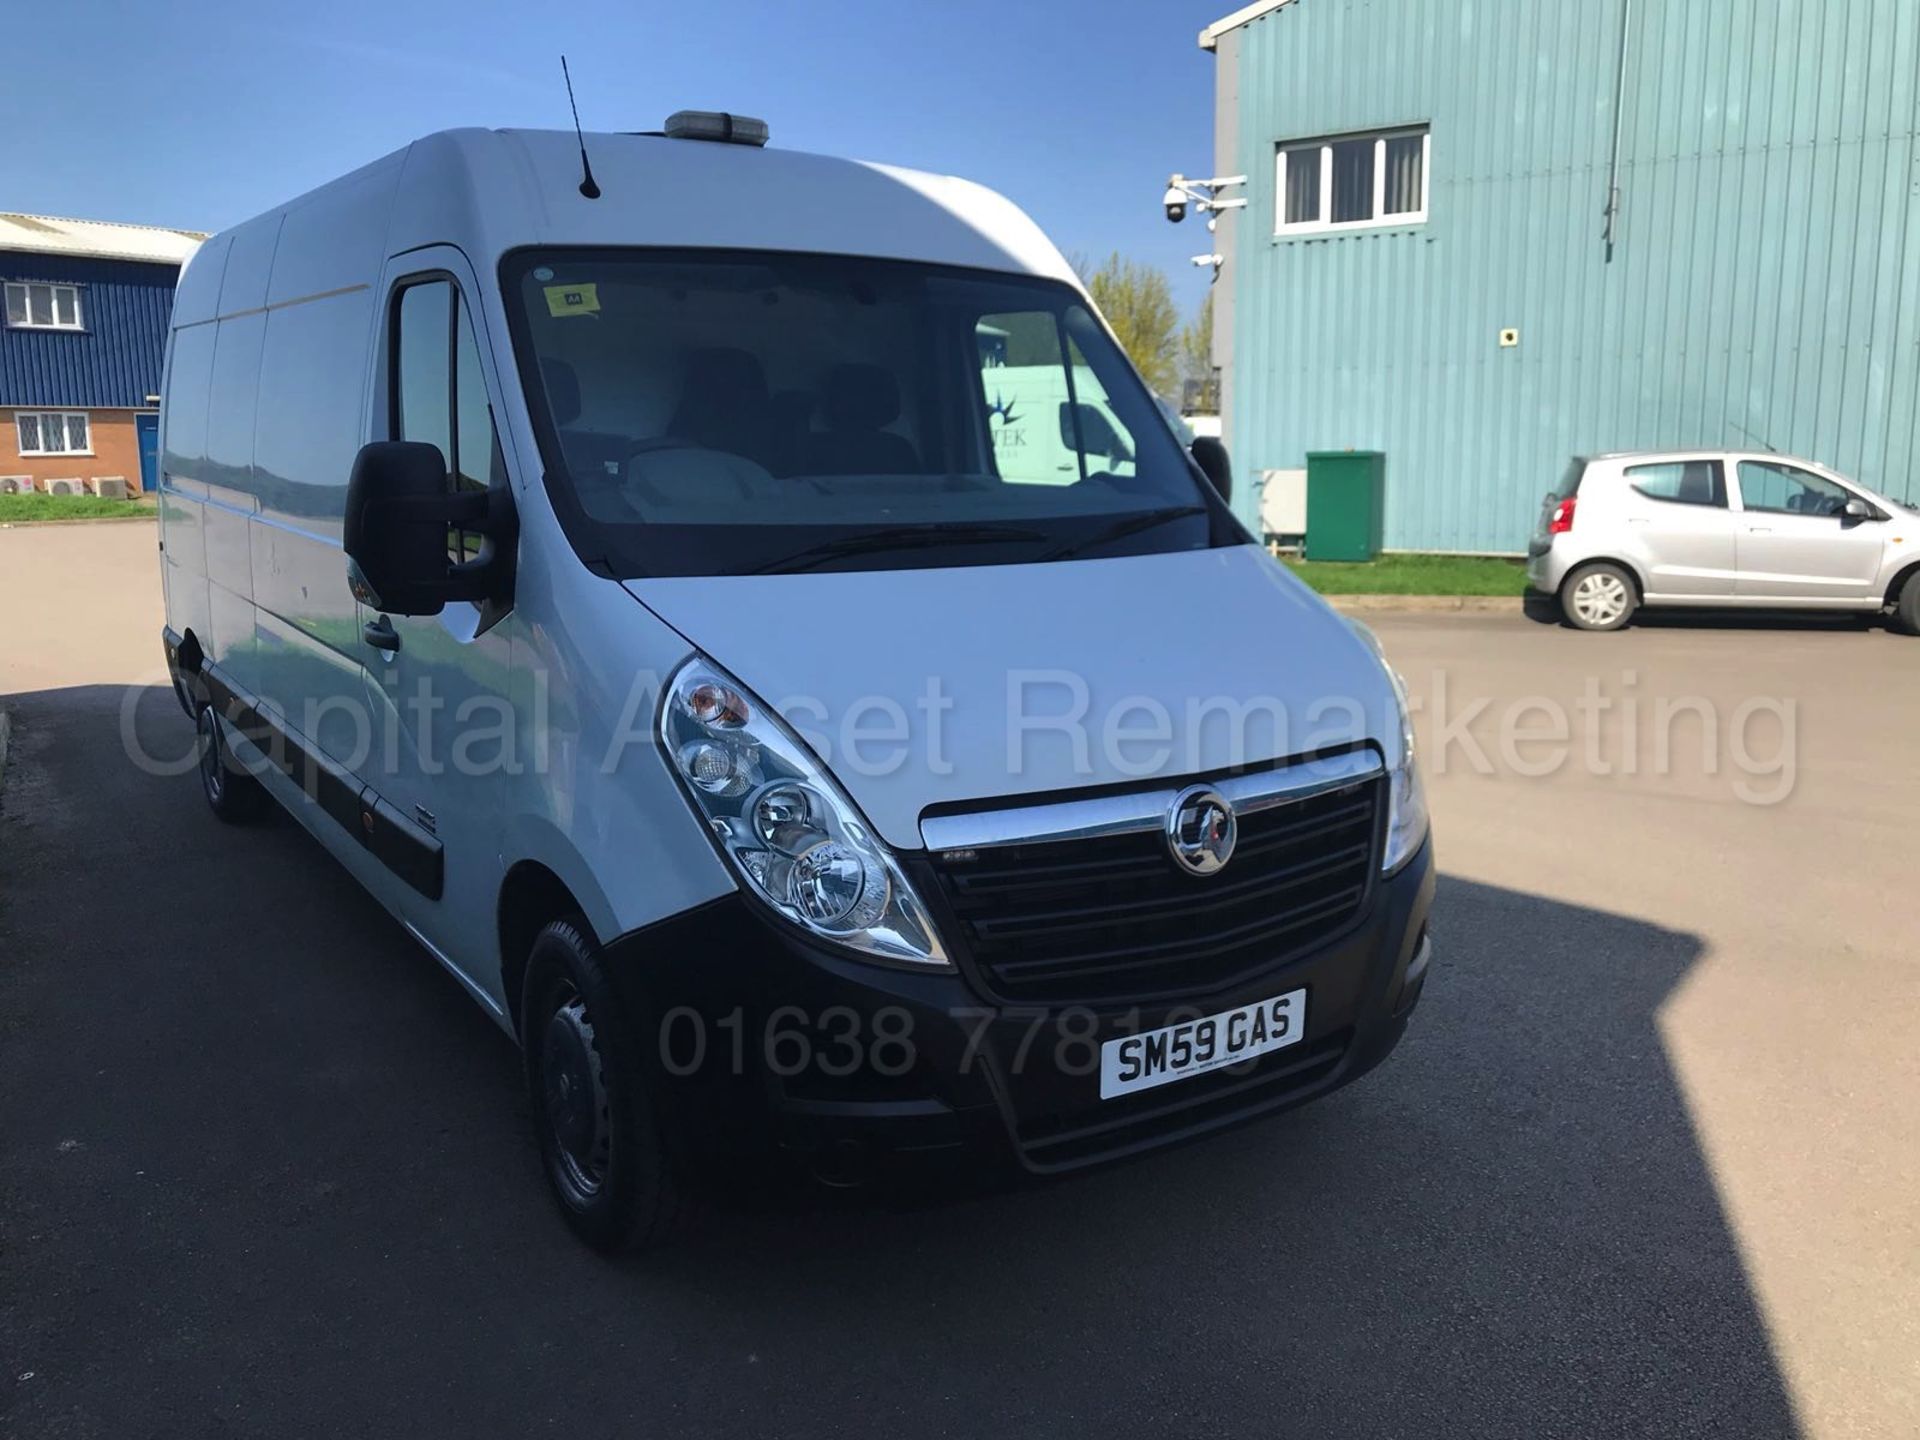 (On Sale) VAUXHALL MOVANO F3500 'LWB HI-ROOF' (2013 MODEL) '2.3 CDTI - 125 BHP - 6 SPEED' *AIR CON* - Image 2 of 21